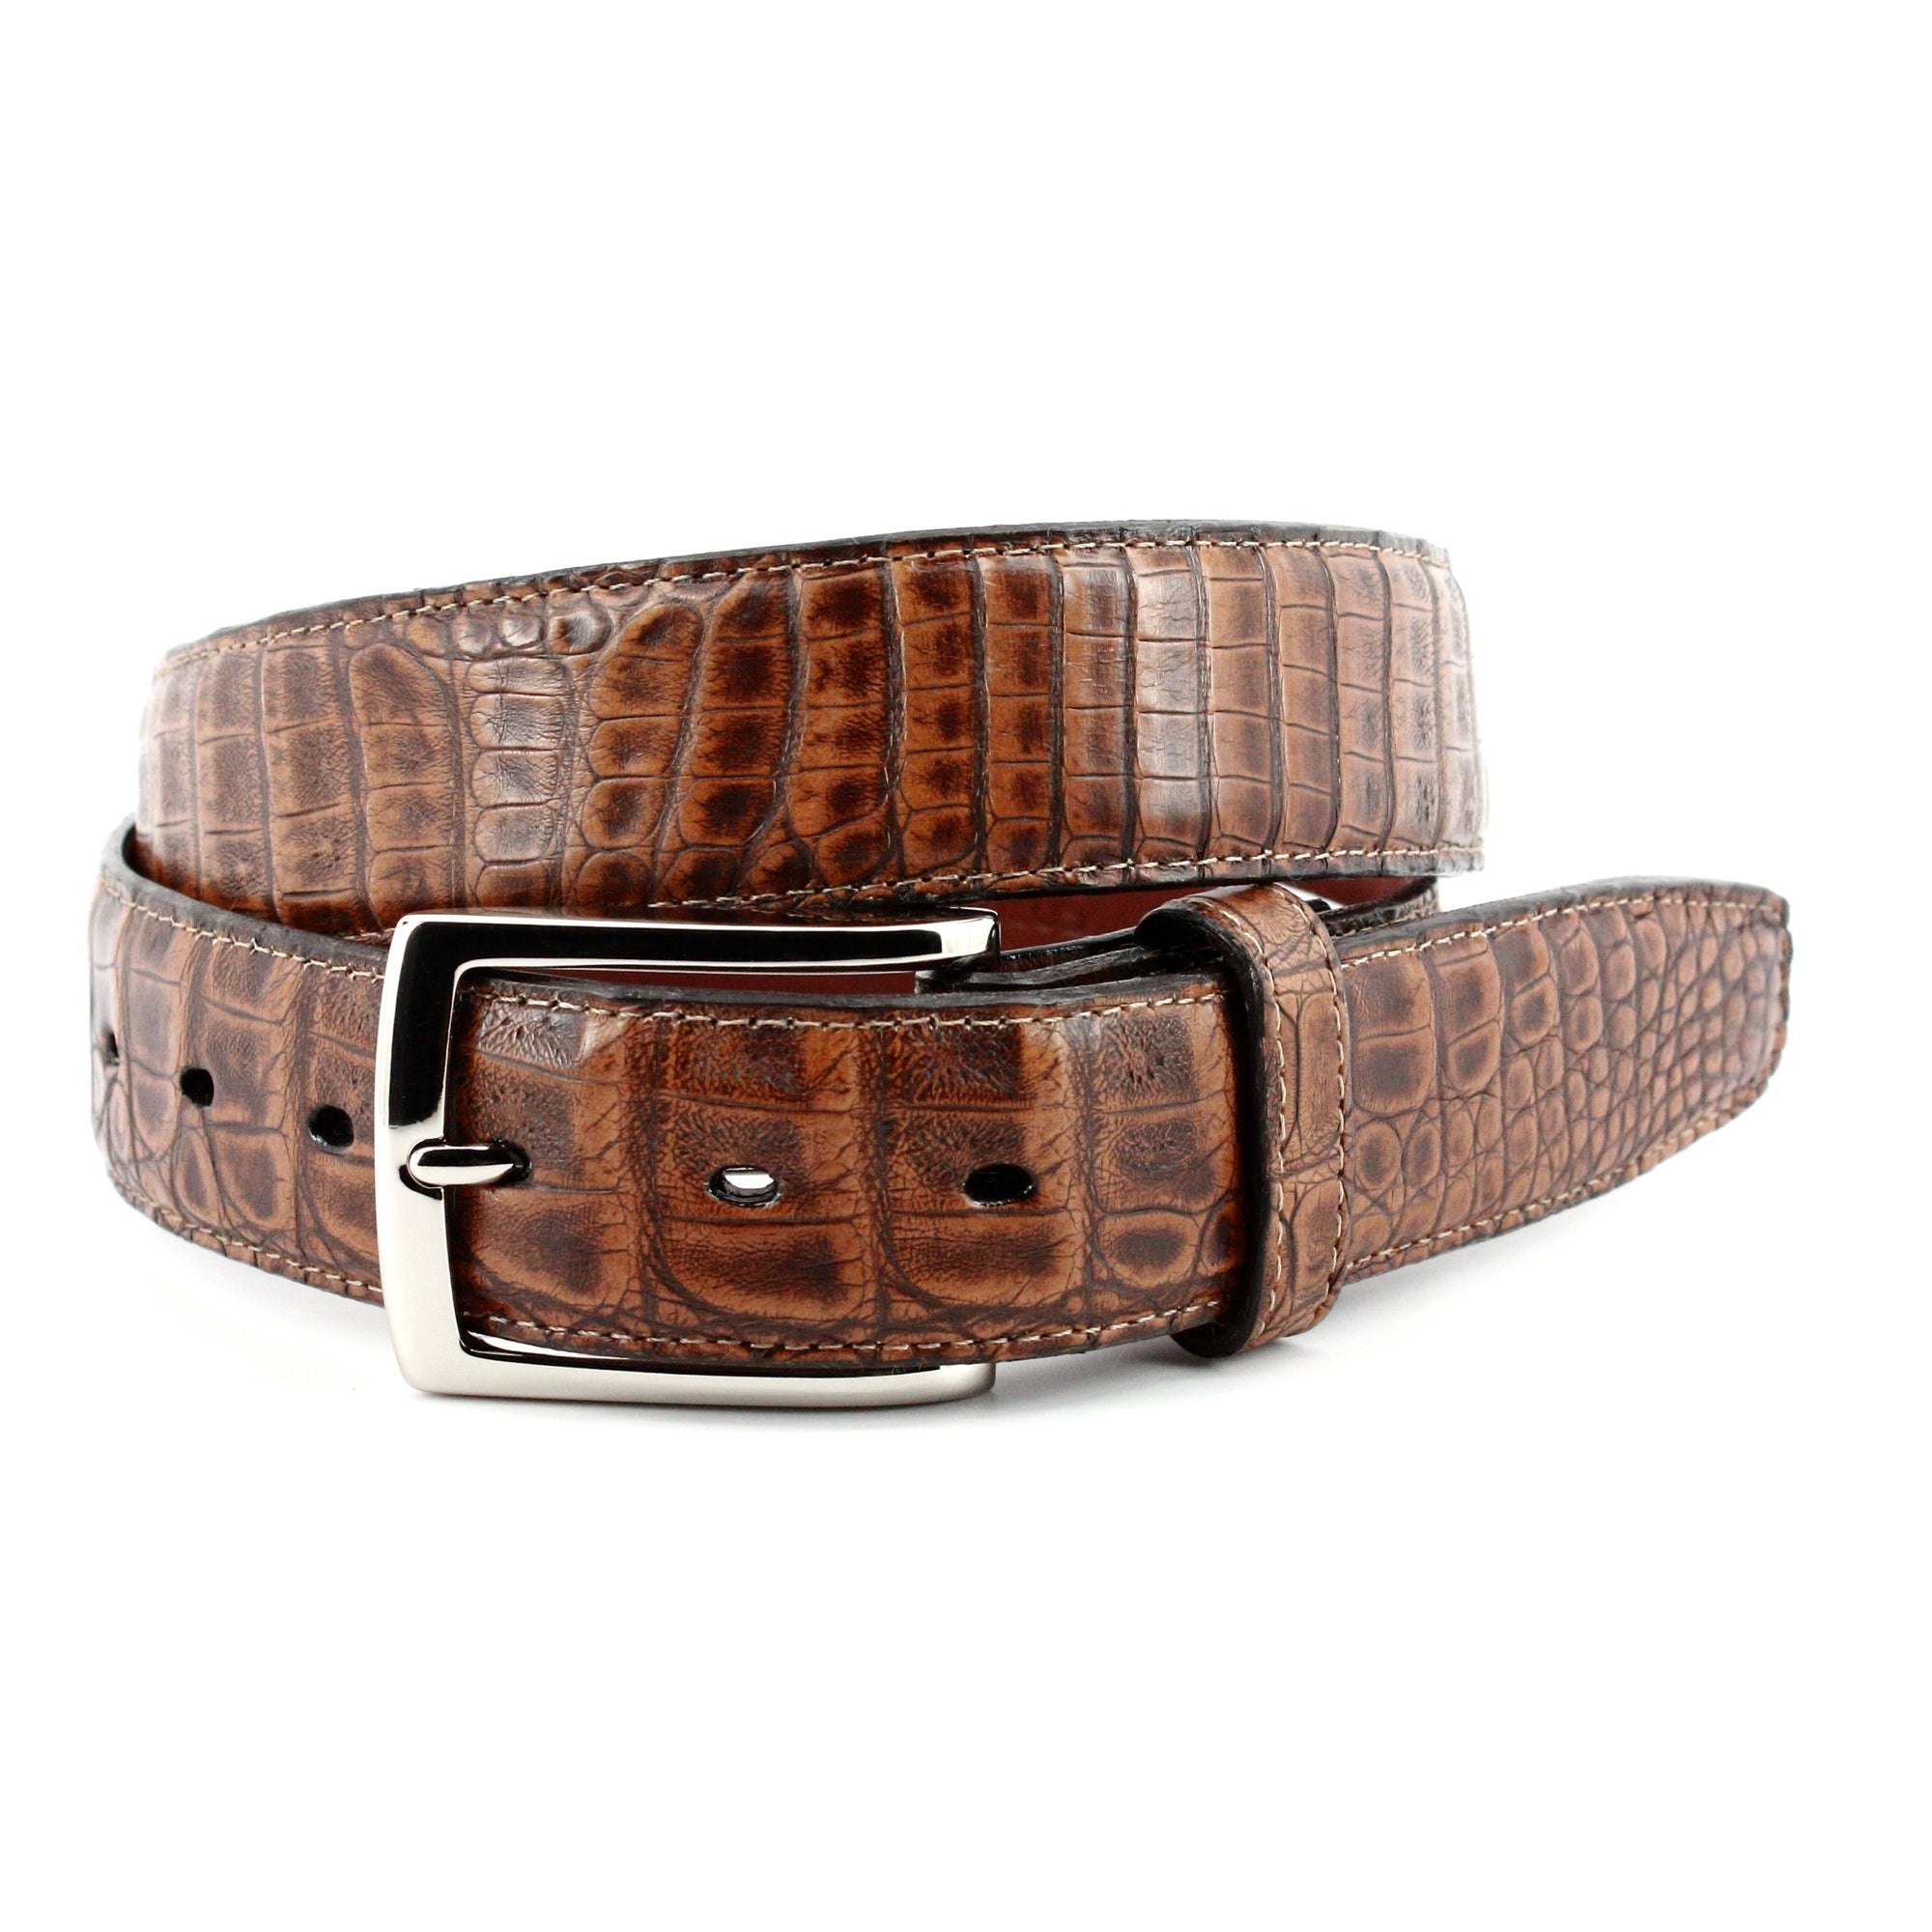 South American Caiman Belt in Antiqued Pecan by Torino Leather